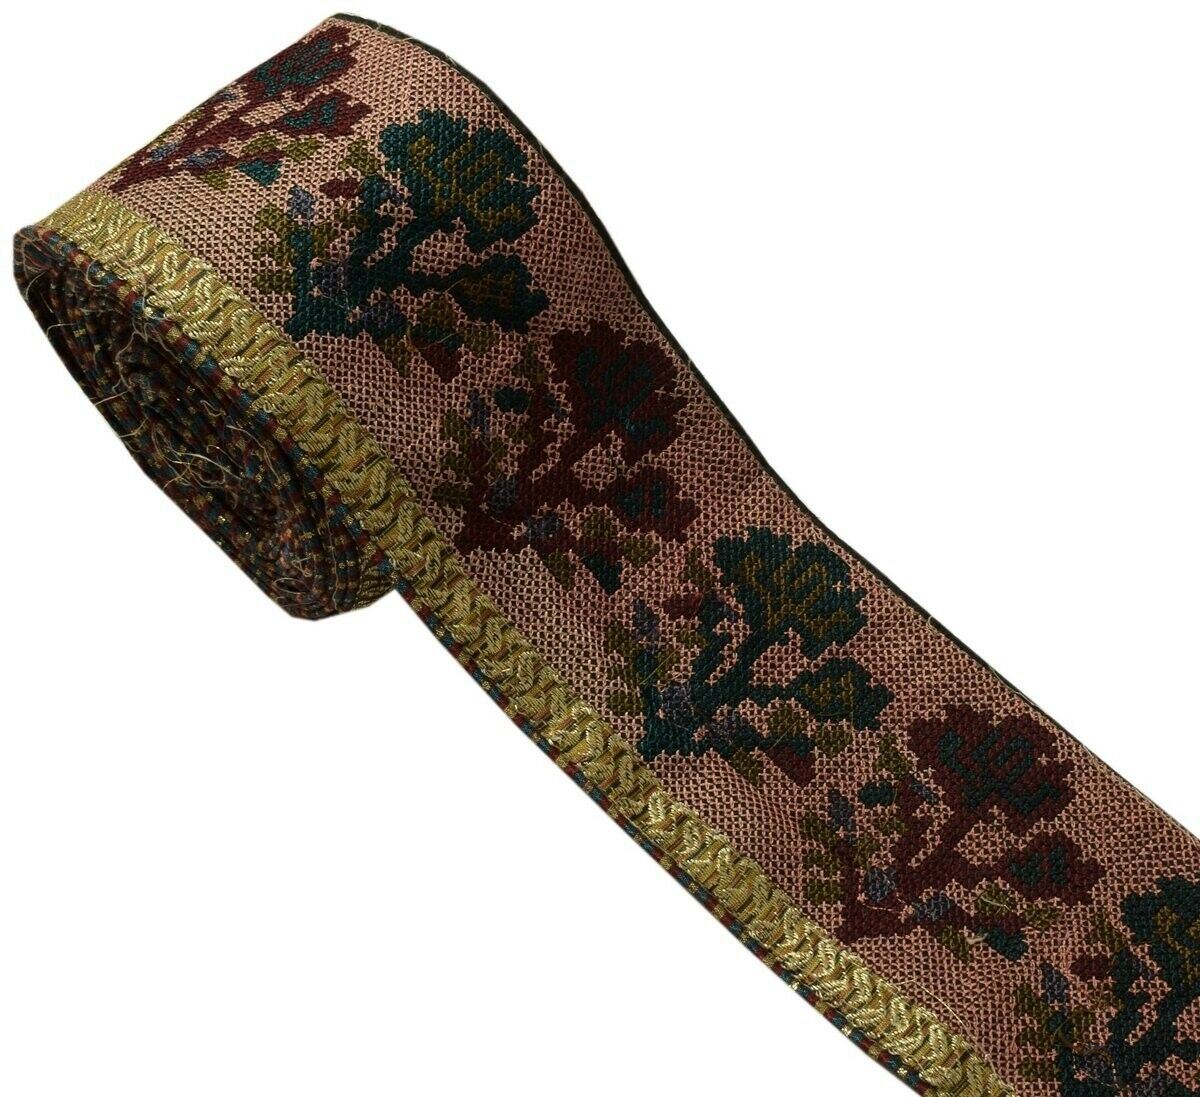 3.5" W Vintage Sari Border Indian Craft Trim Embroidered Sewing Ribbon Lace